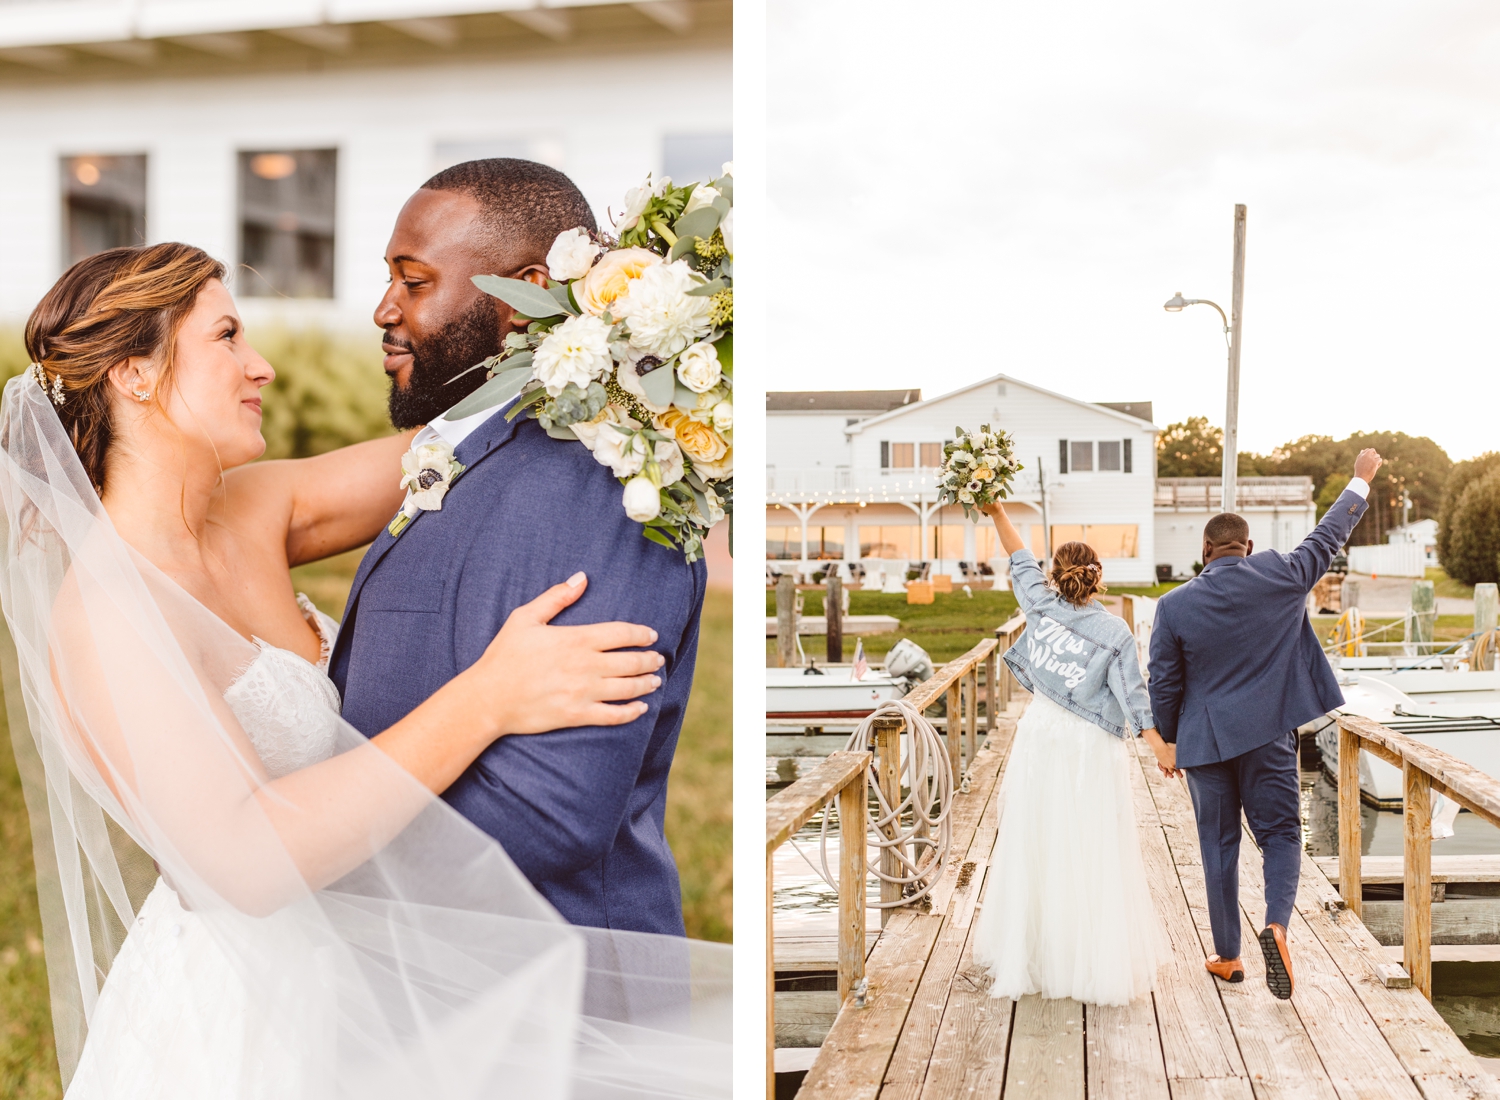 Bride and groom looking at each other with veil blowing in wind | Bride and groom walking away with fists raised in the air | Brooke Michelle Photography